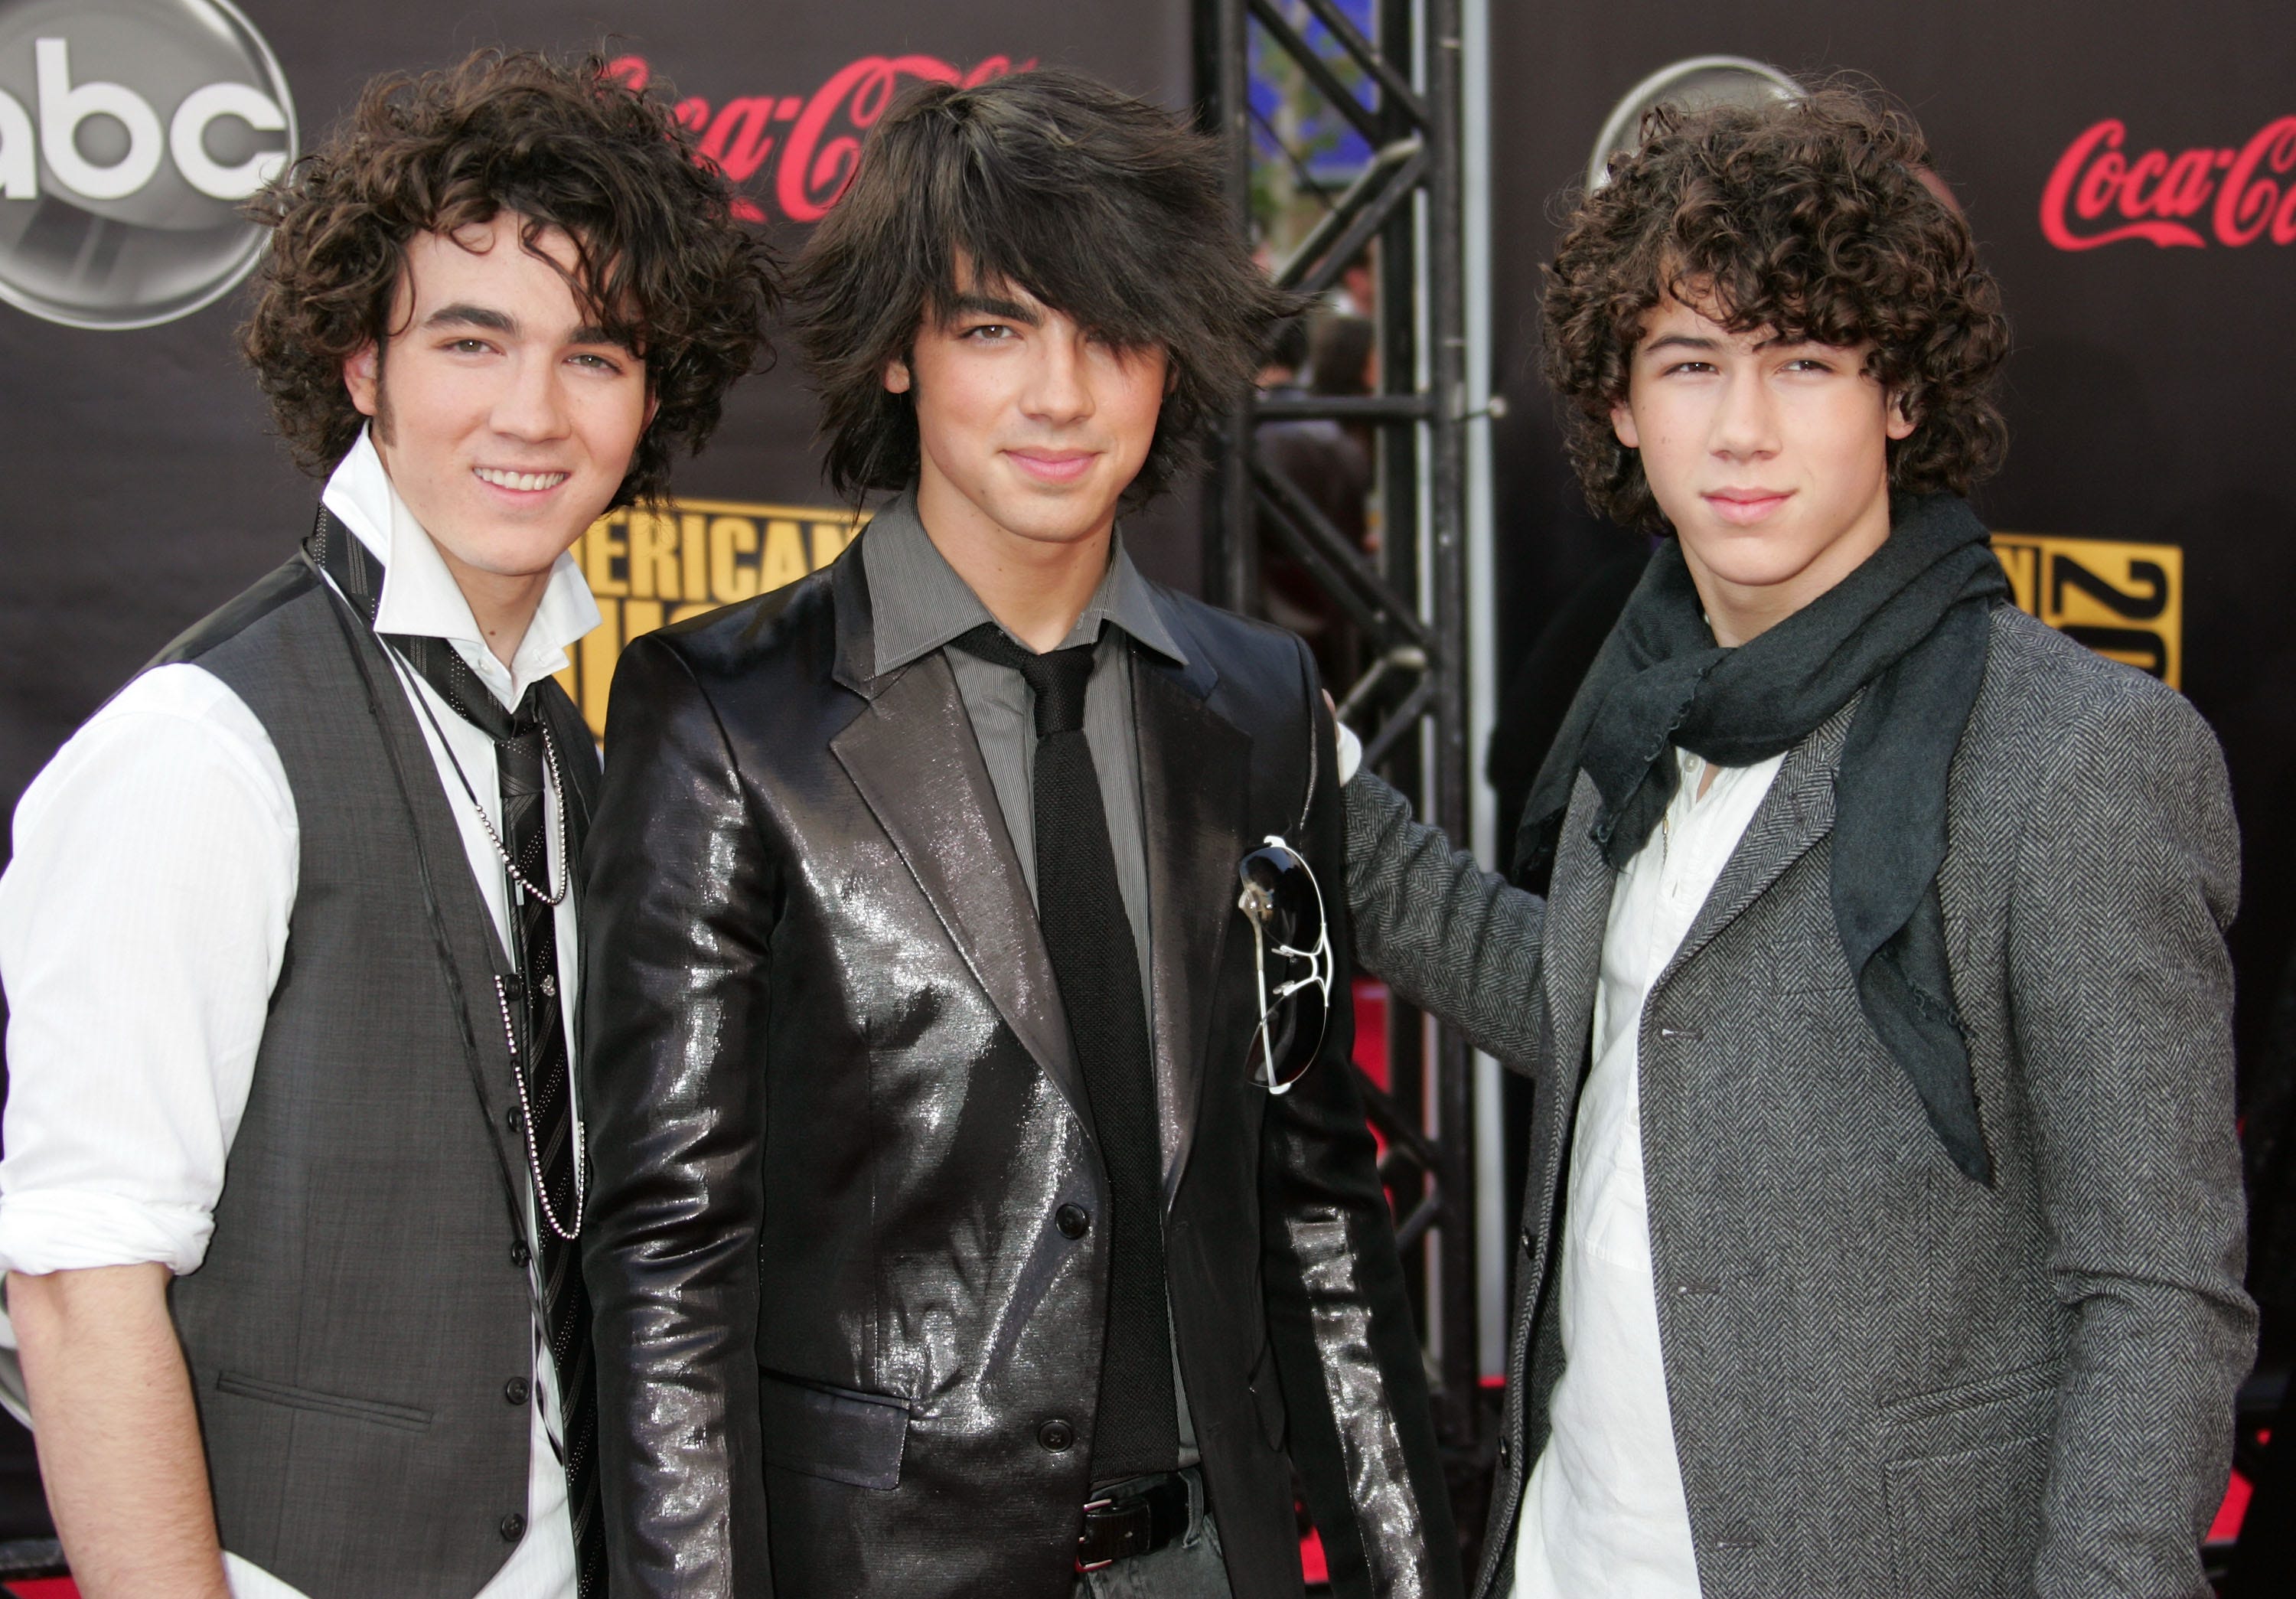 The Jonas Brothers with long hair in 2007